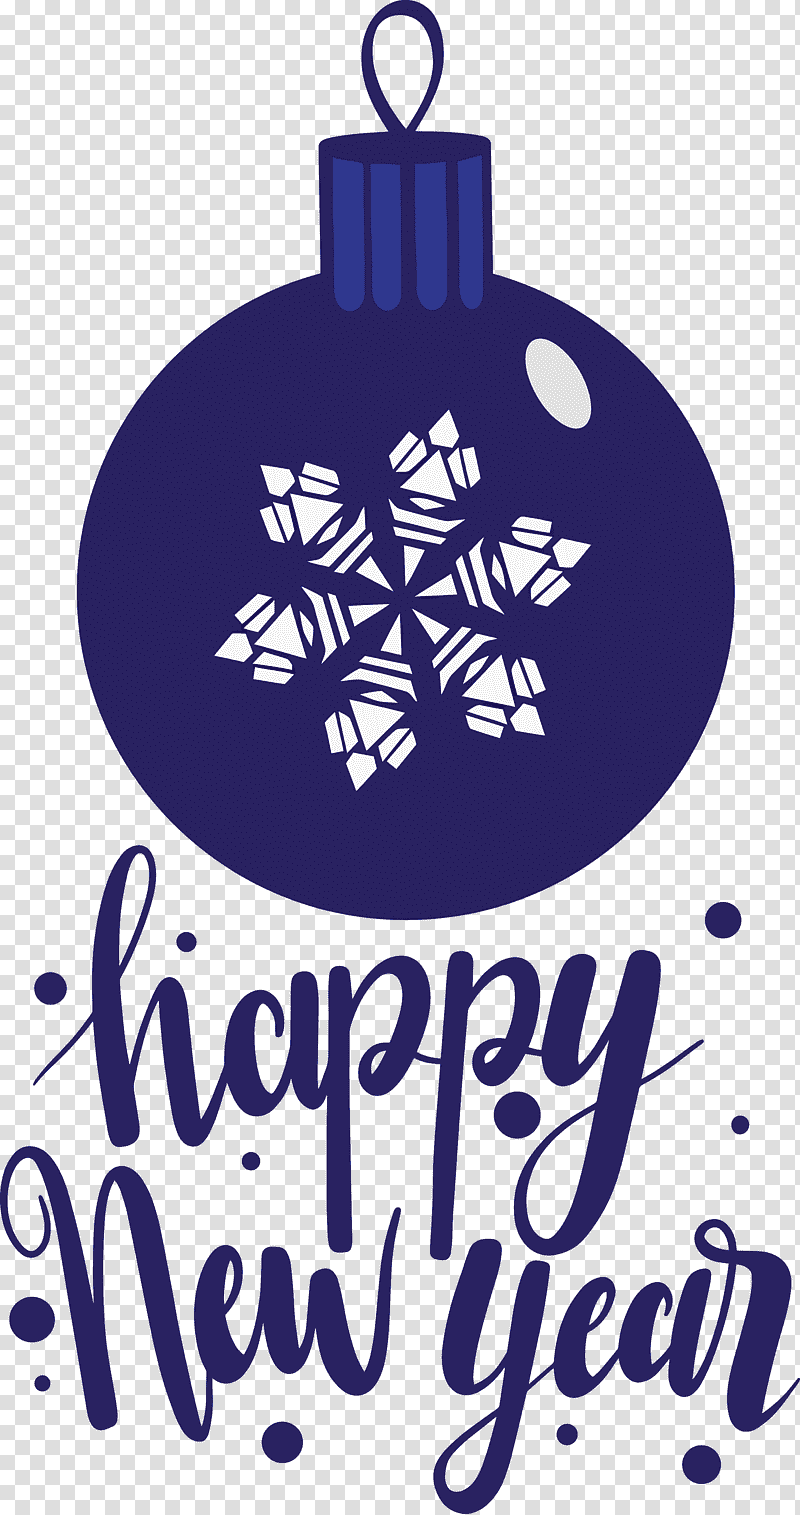 2021 Happy New Year 2021 New Year Happy New Year, Cobalt Blue, Christmas Ornament, Logo, Christmas Ornament M, Electric Blue M, Holiday transparent background PNG clipart